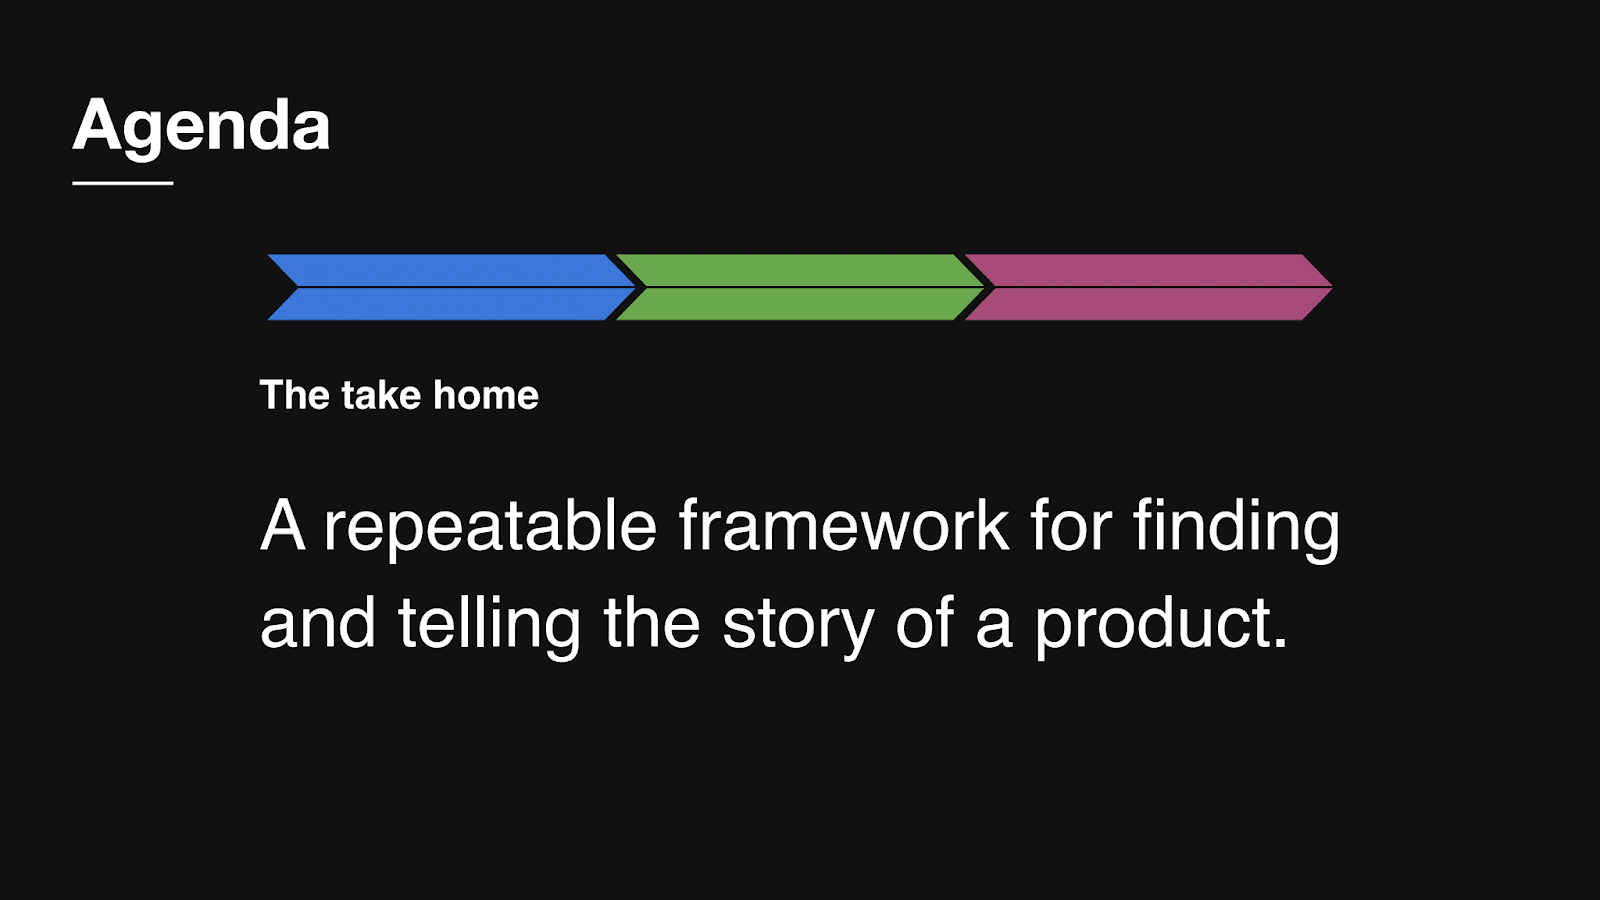 The take home: A repeatable framewok for finding and telling the story of a product.